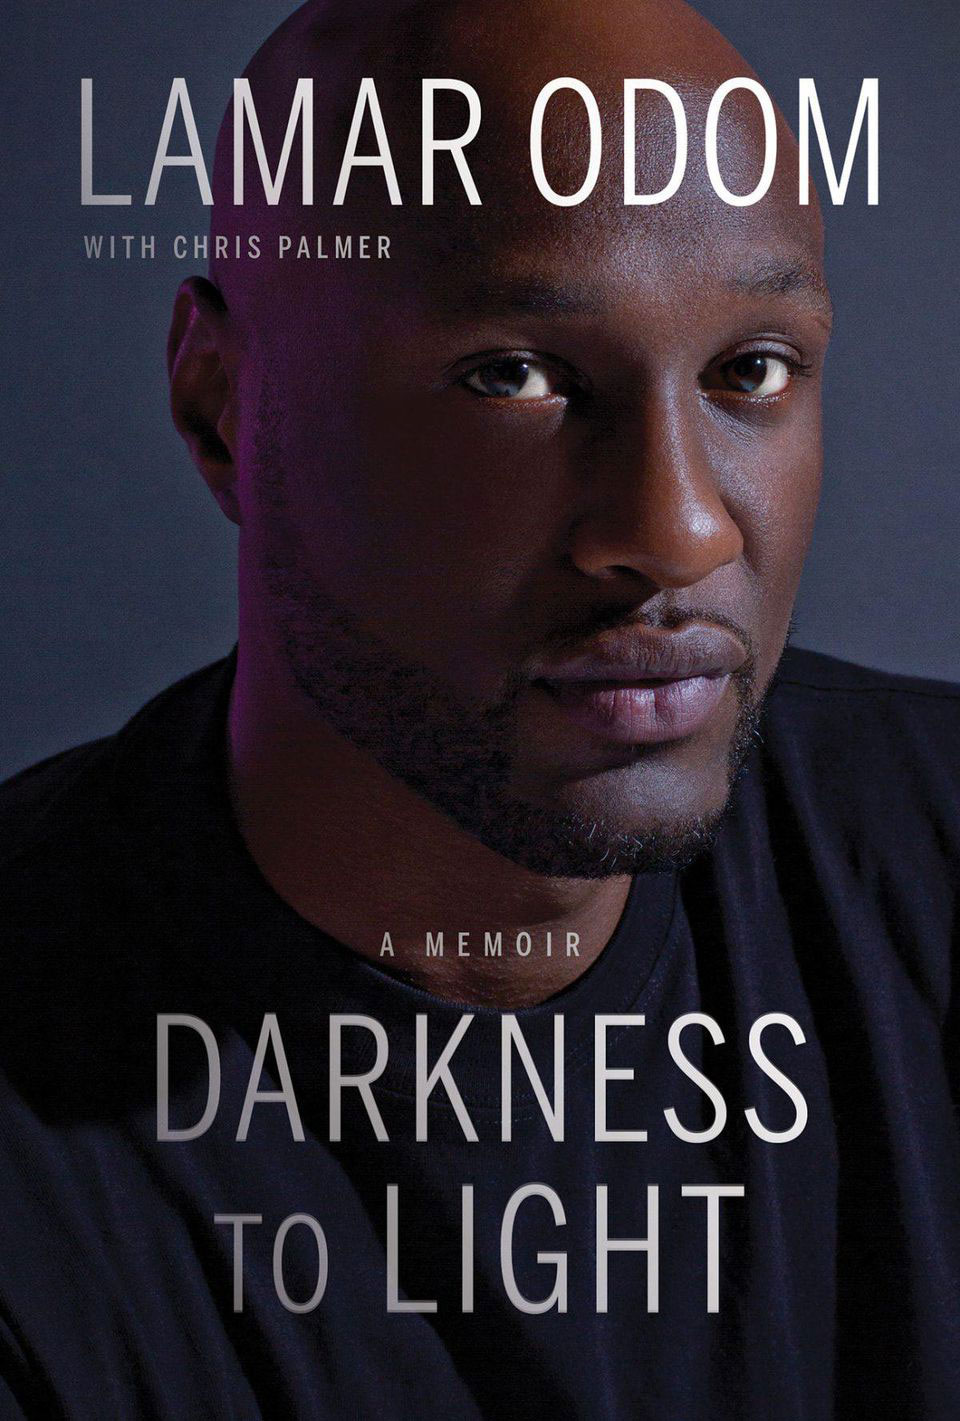 Lamar Odom memoir Darkness to Light Lamar Odom Admits He Paid for 'Plenty of Abortions' Over the Years